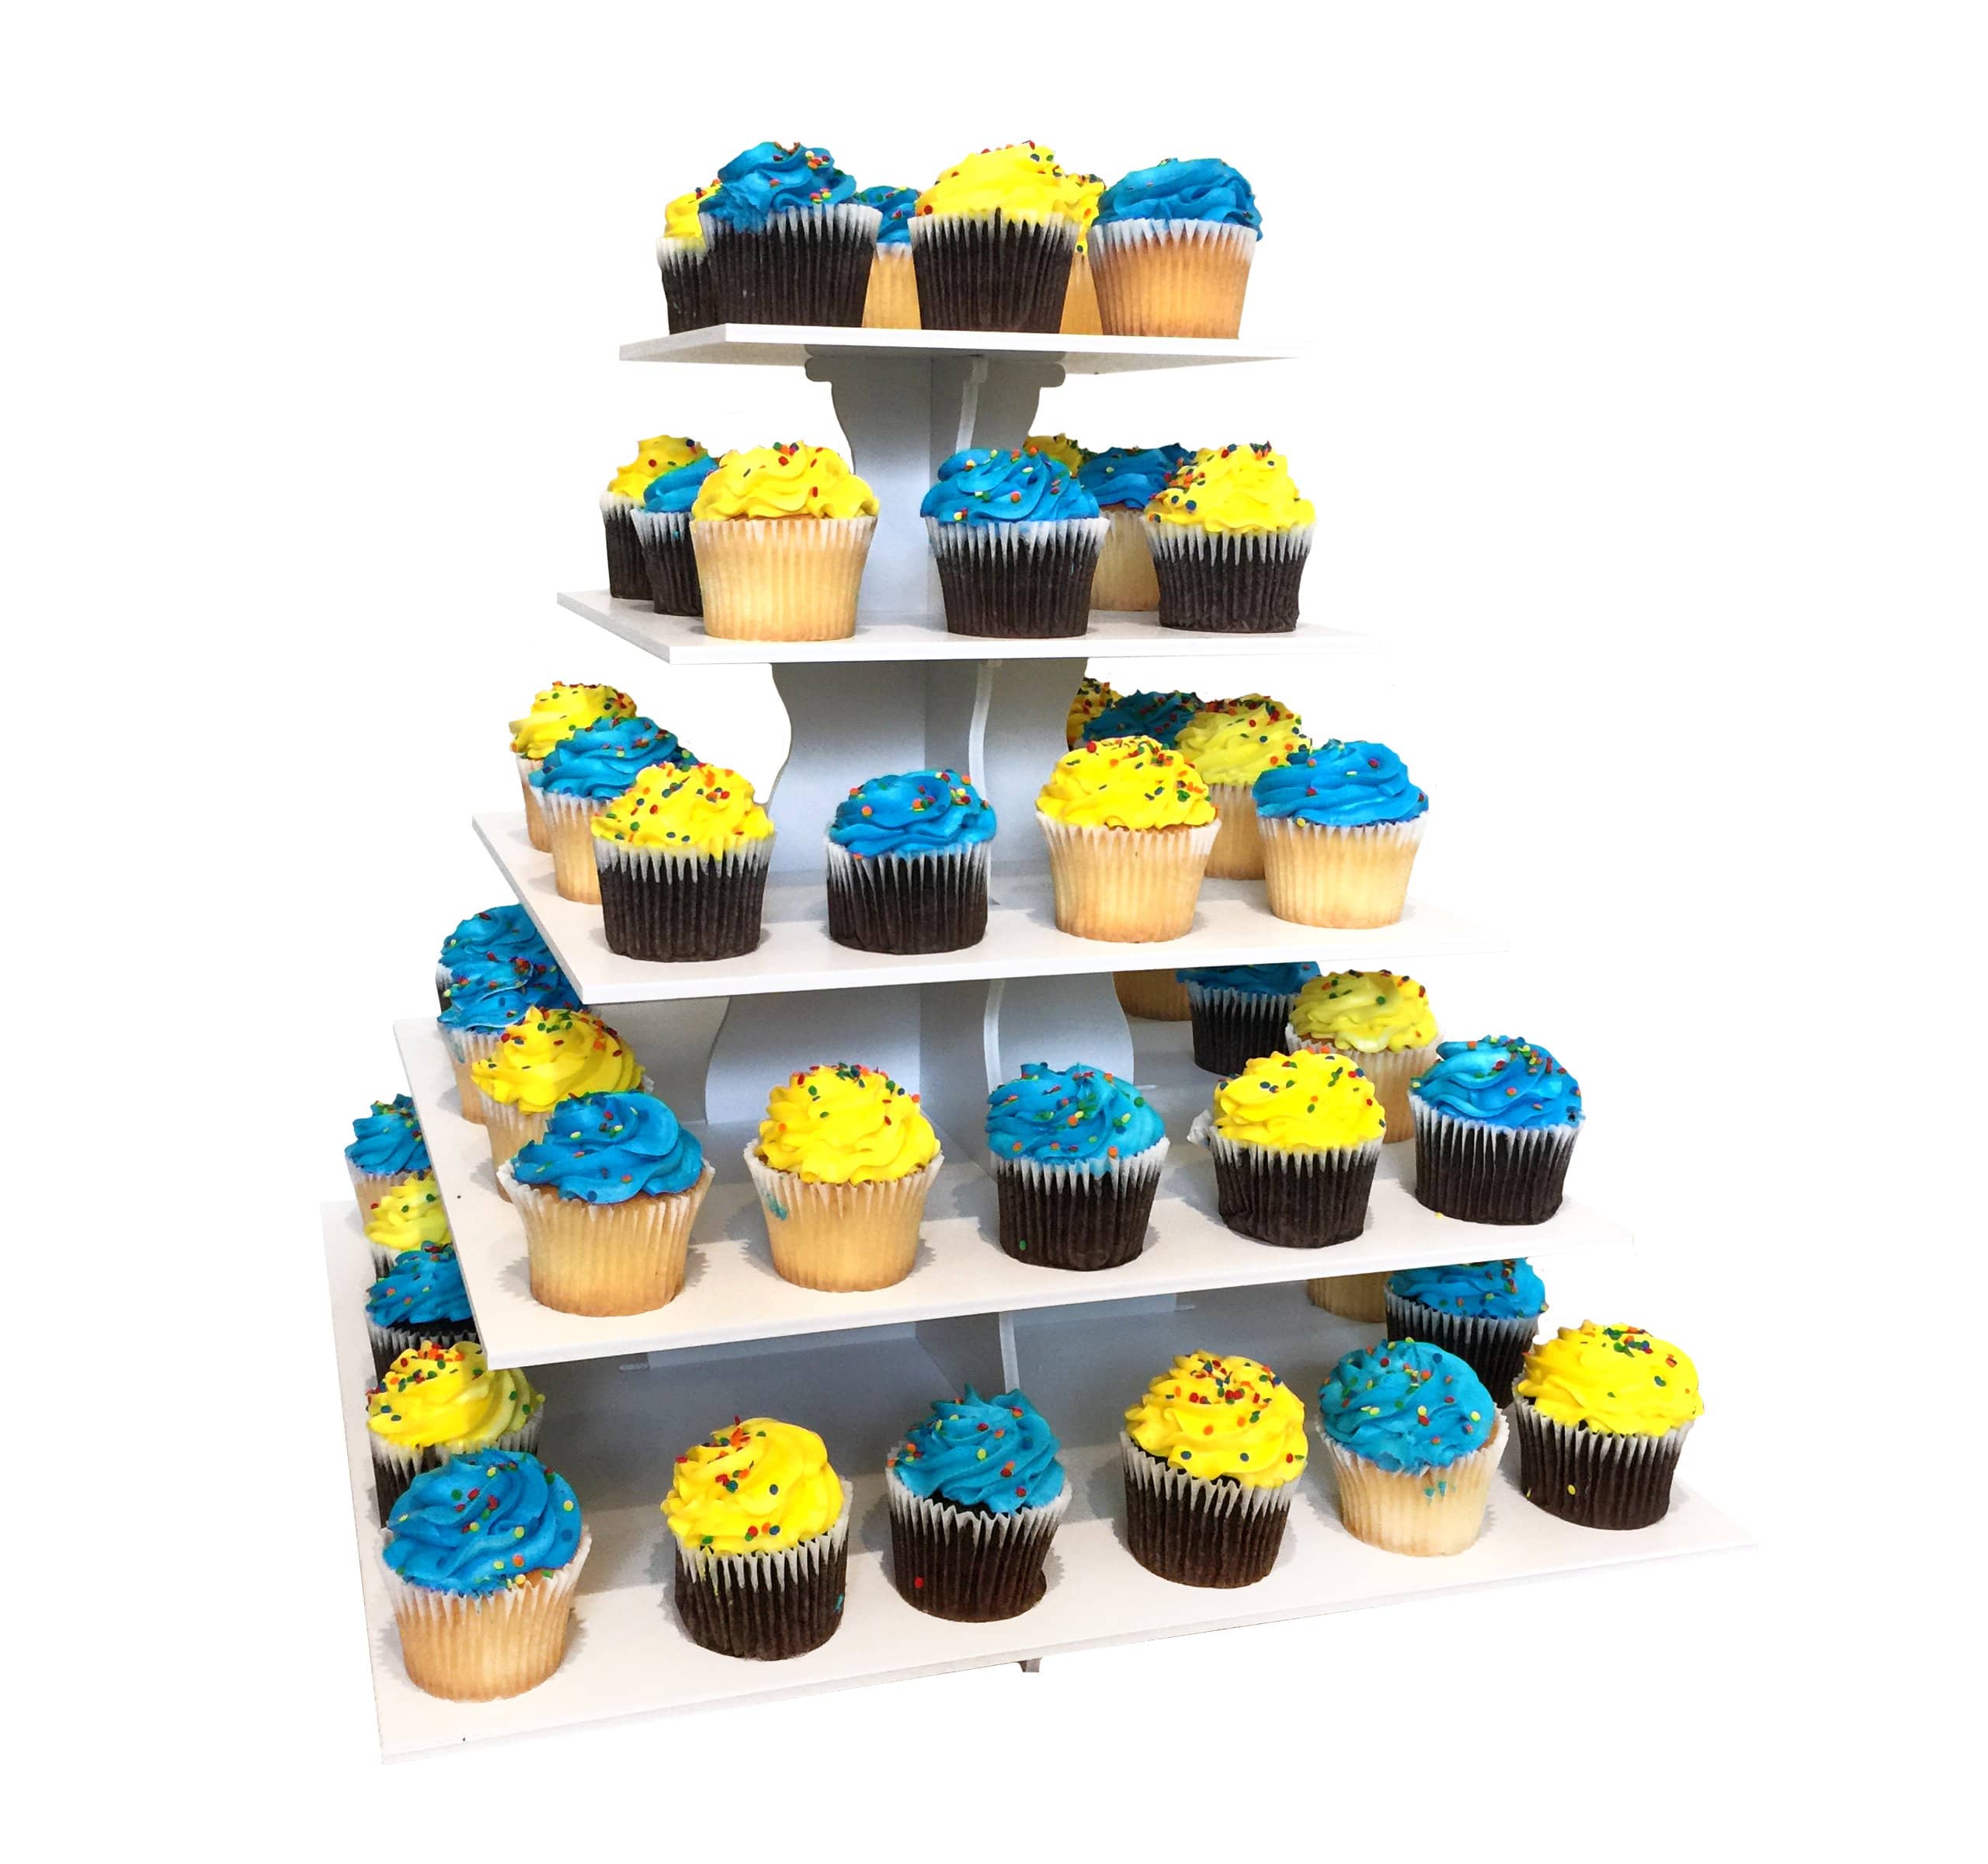 The Smart Baker - Adjustable, Reusable 5 Tier Round Cupcake & Dessert Tower  Display Stand, White - Holds up to 90+ Cupcakes